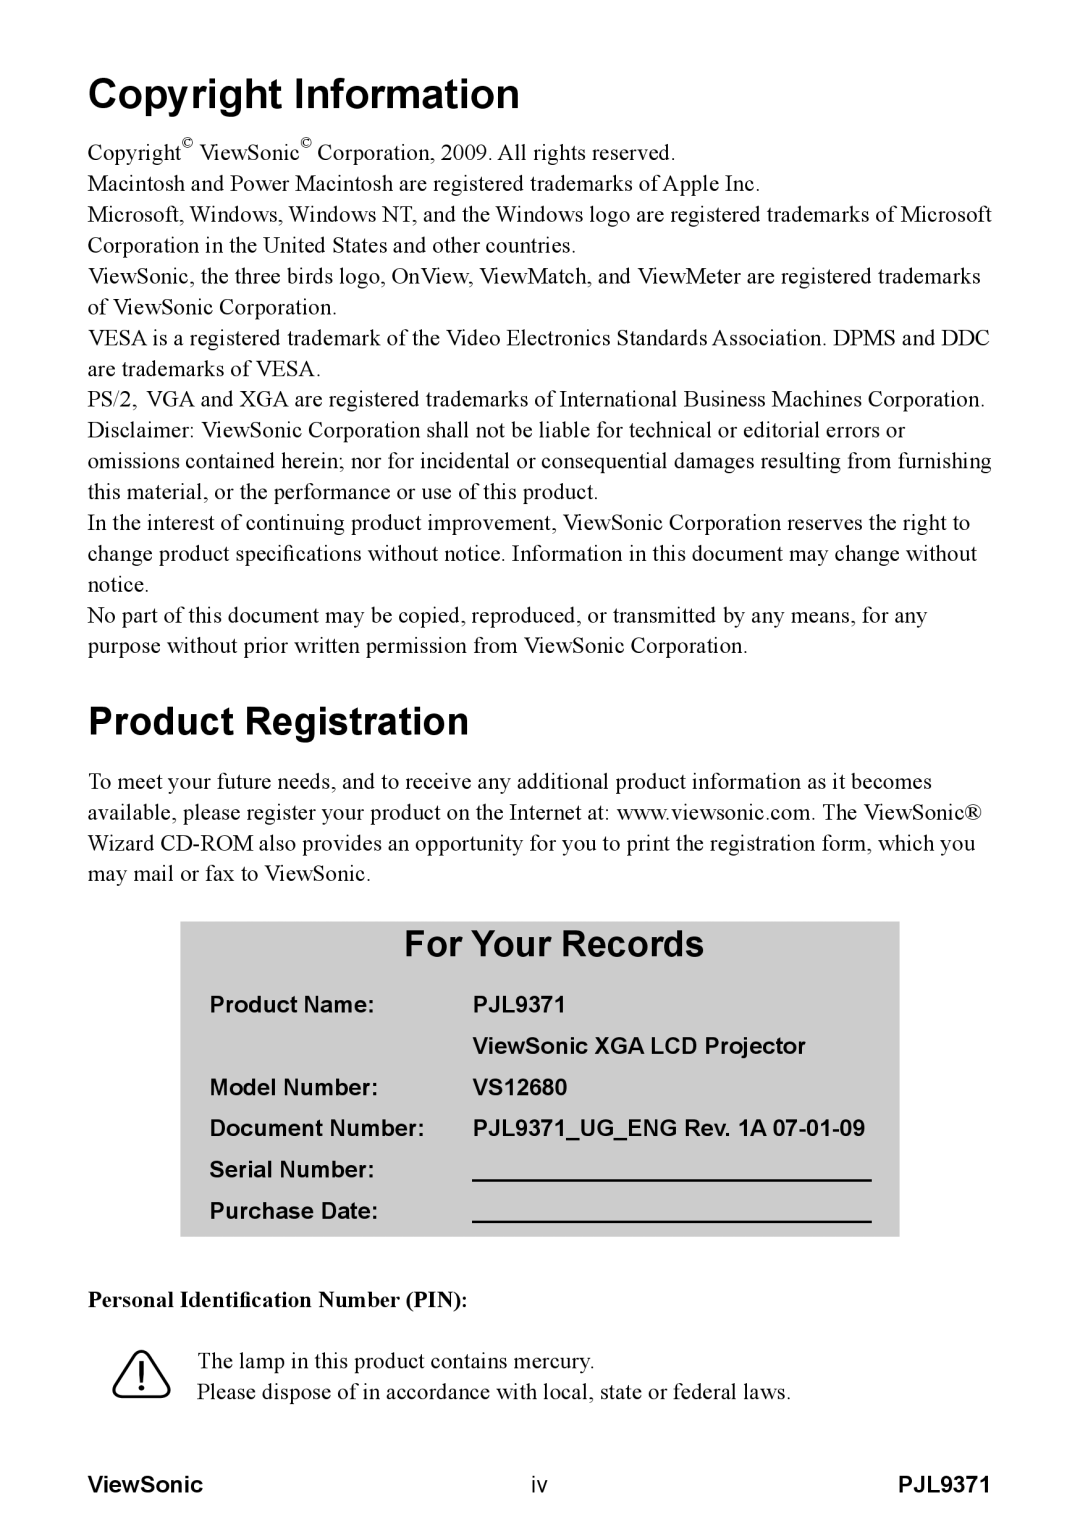 ViewSonic pjl9371 manual Product Registration, For Your Records, Copyright Information, Product Name, PJL9371, Model Number 